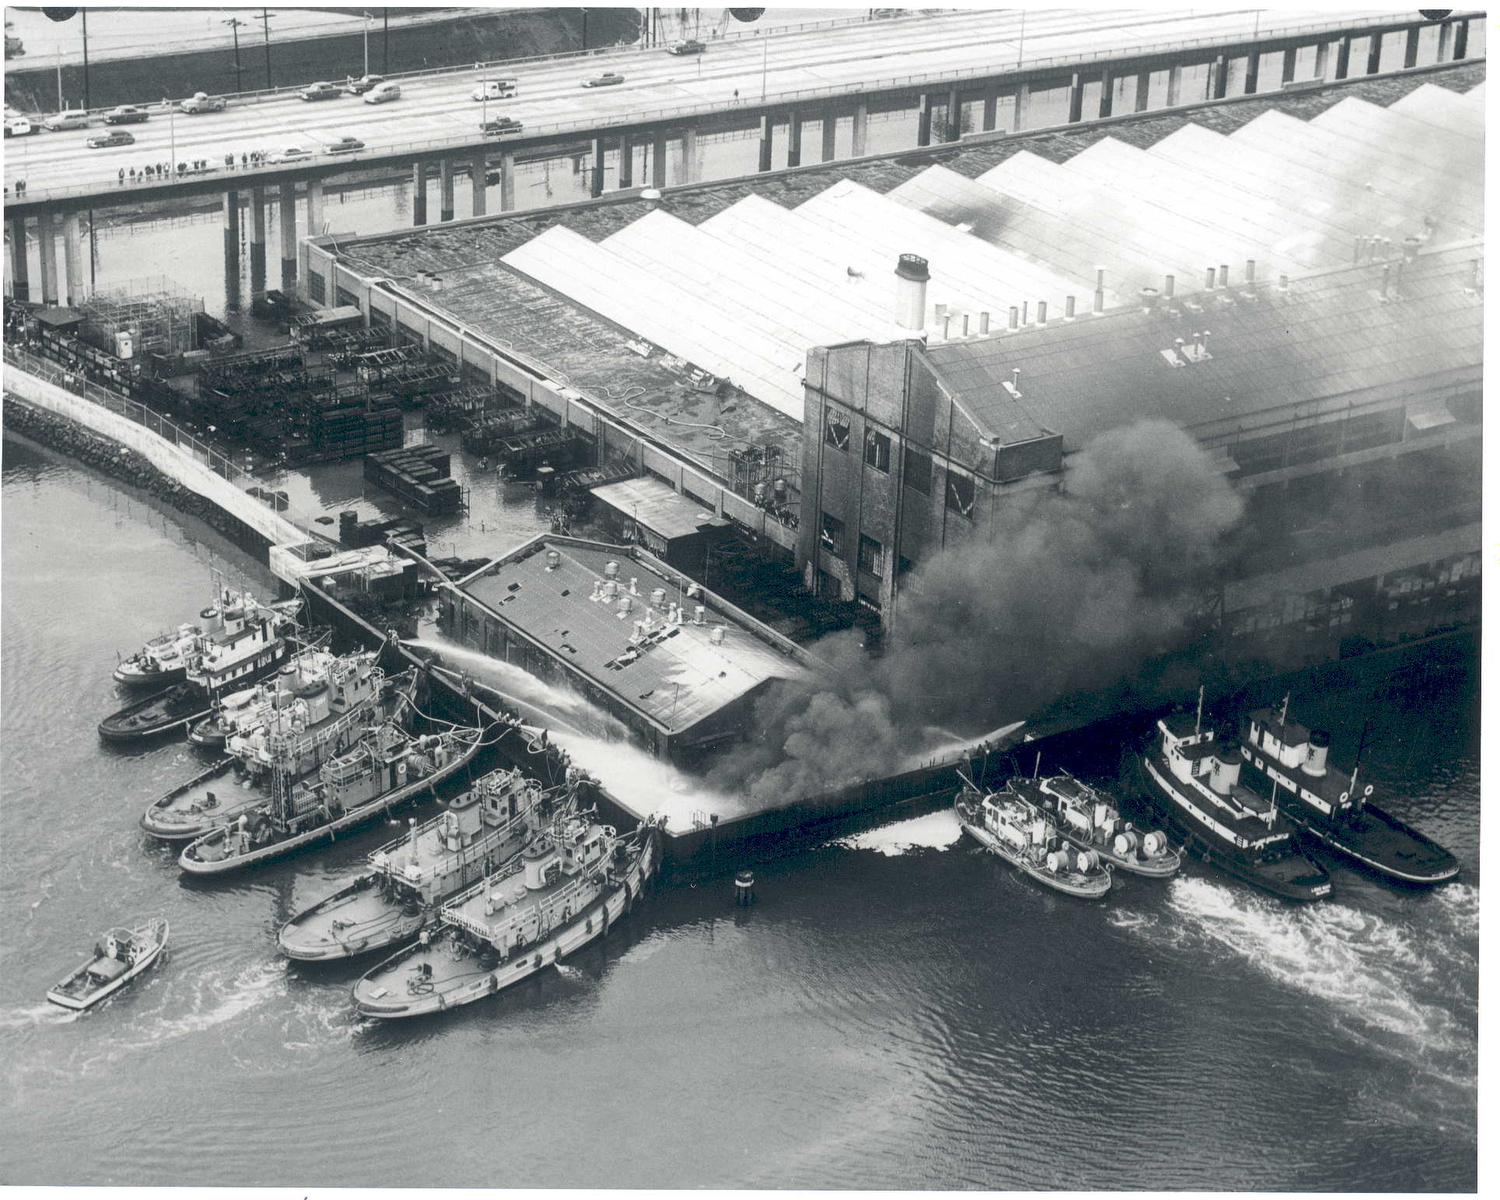 This fire at the Ford plant, triggered by flooding that hit a generator, was the last straw for Ford, which closed the plant in 1957.